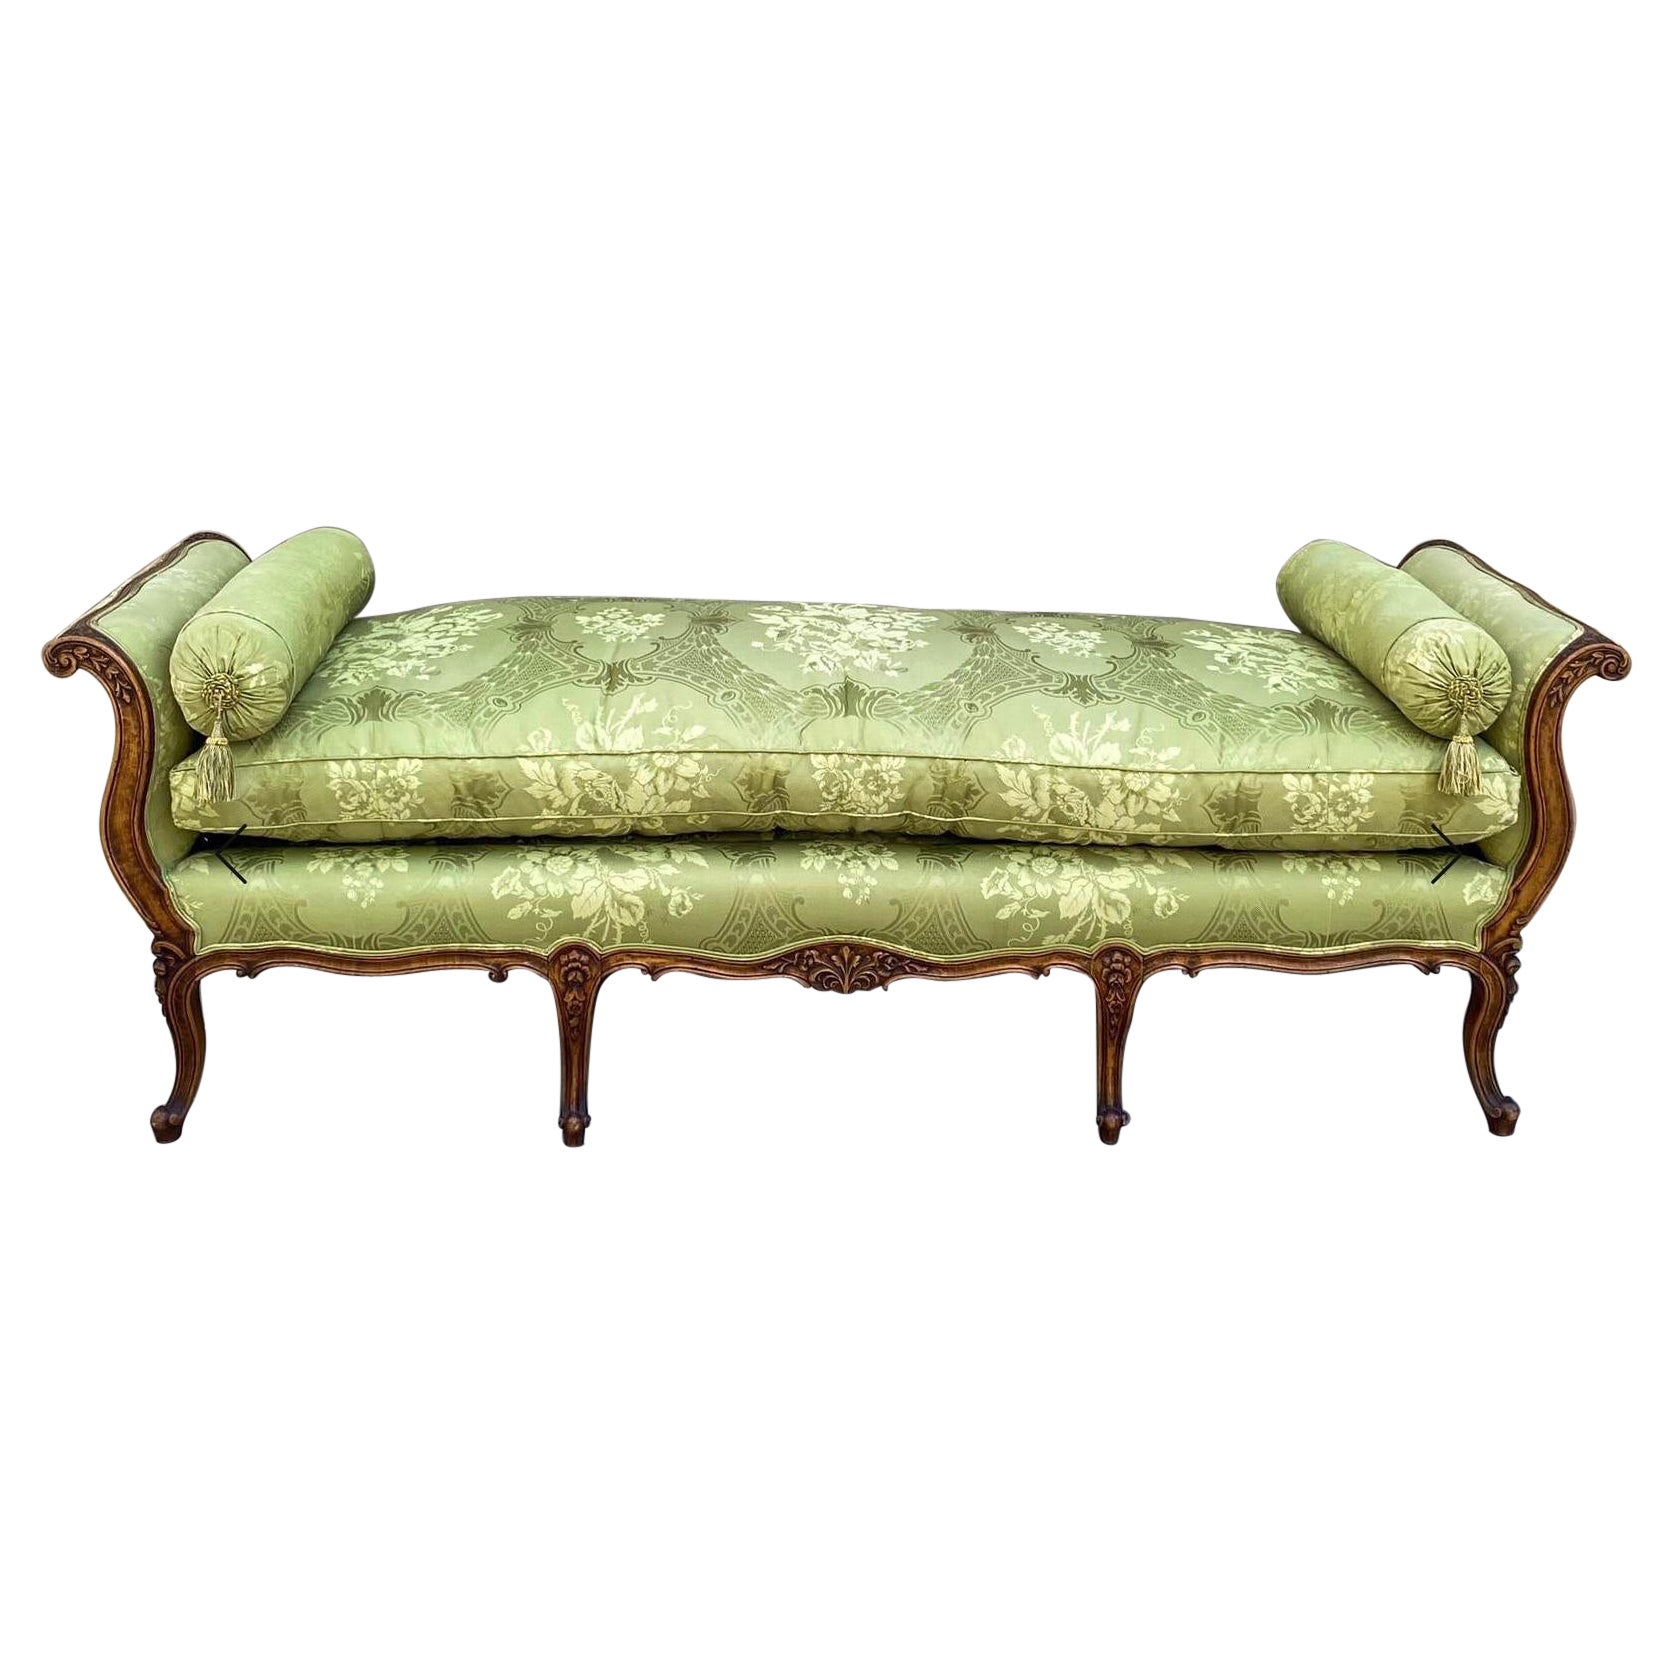 Early 20th Century French Carved Fruitwood Daybed in Green Silk